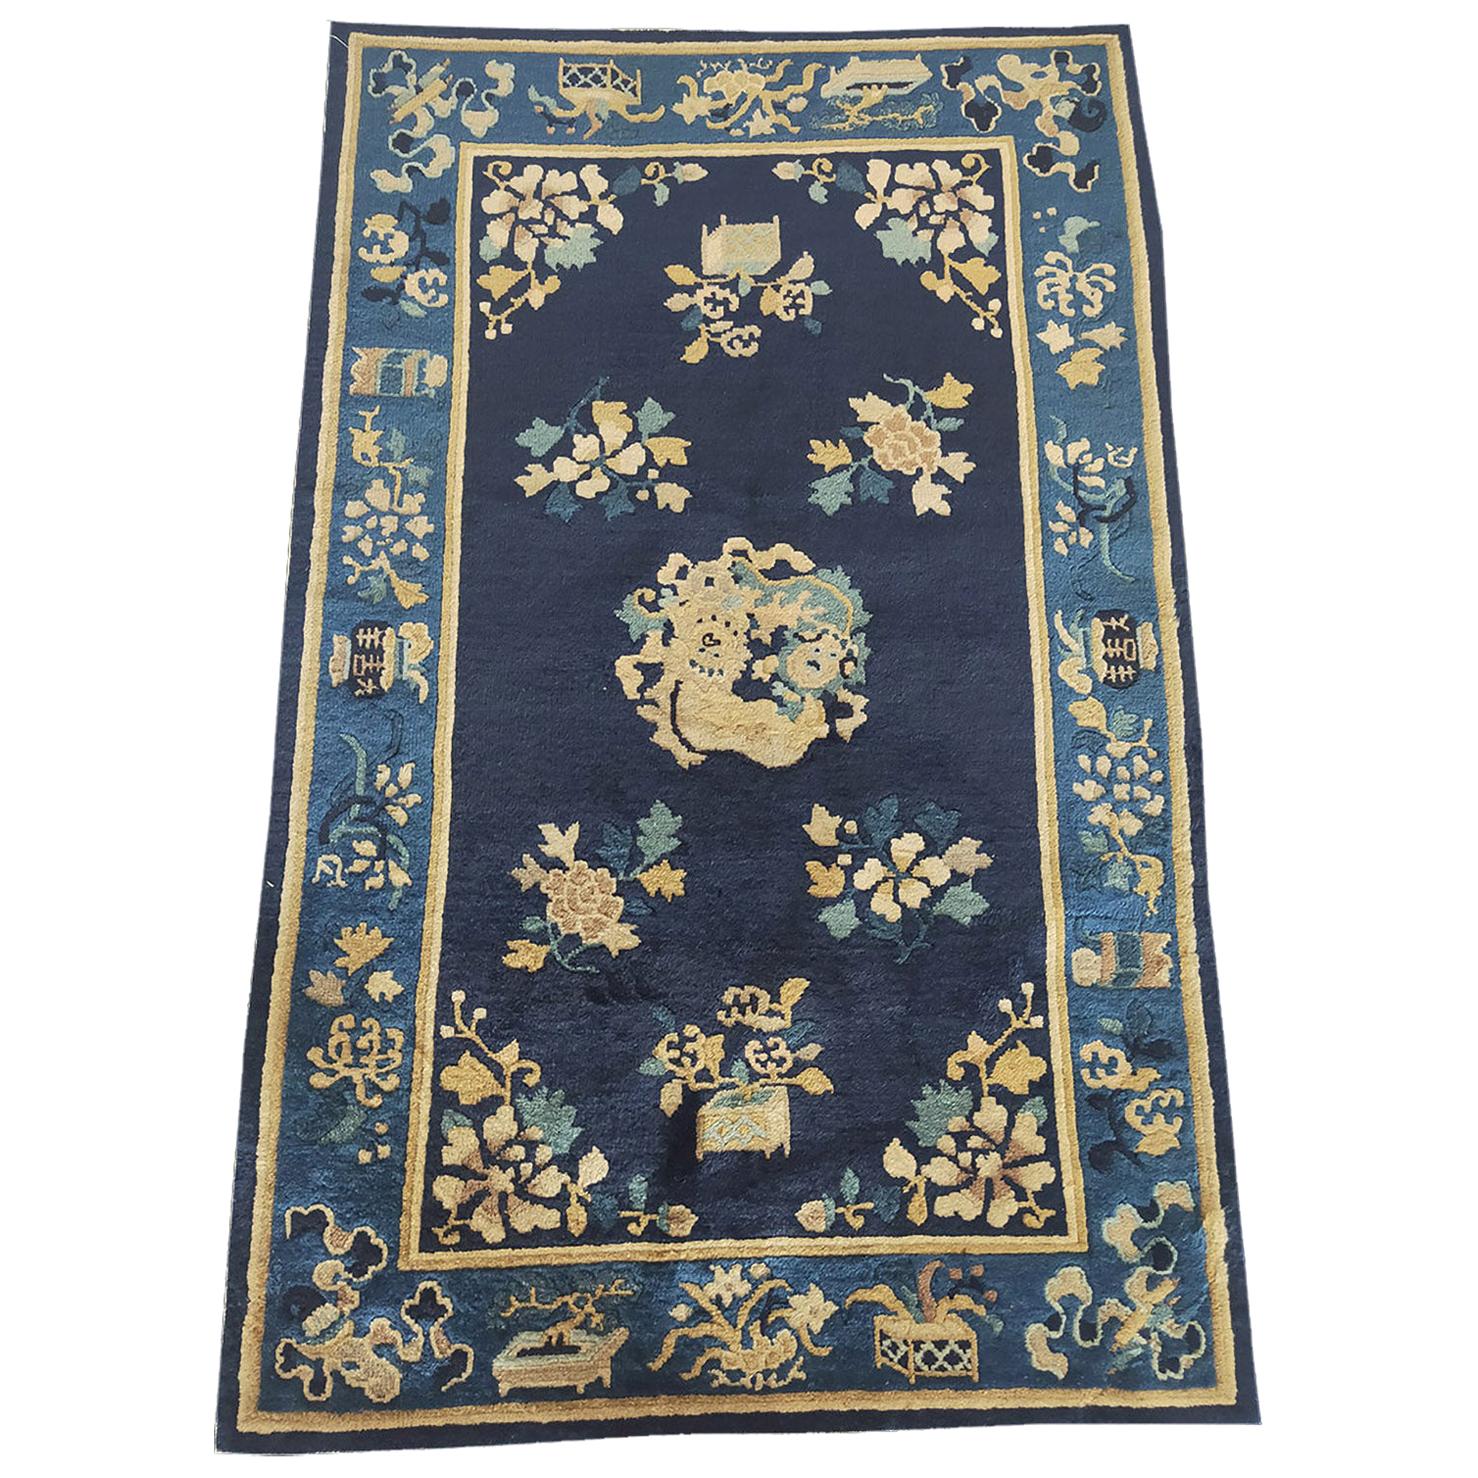 Early 20th Century Chinese Peking Rug ( 3'2" x 4'10" - 97 x 147 ) For Sale